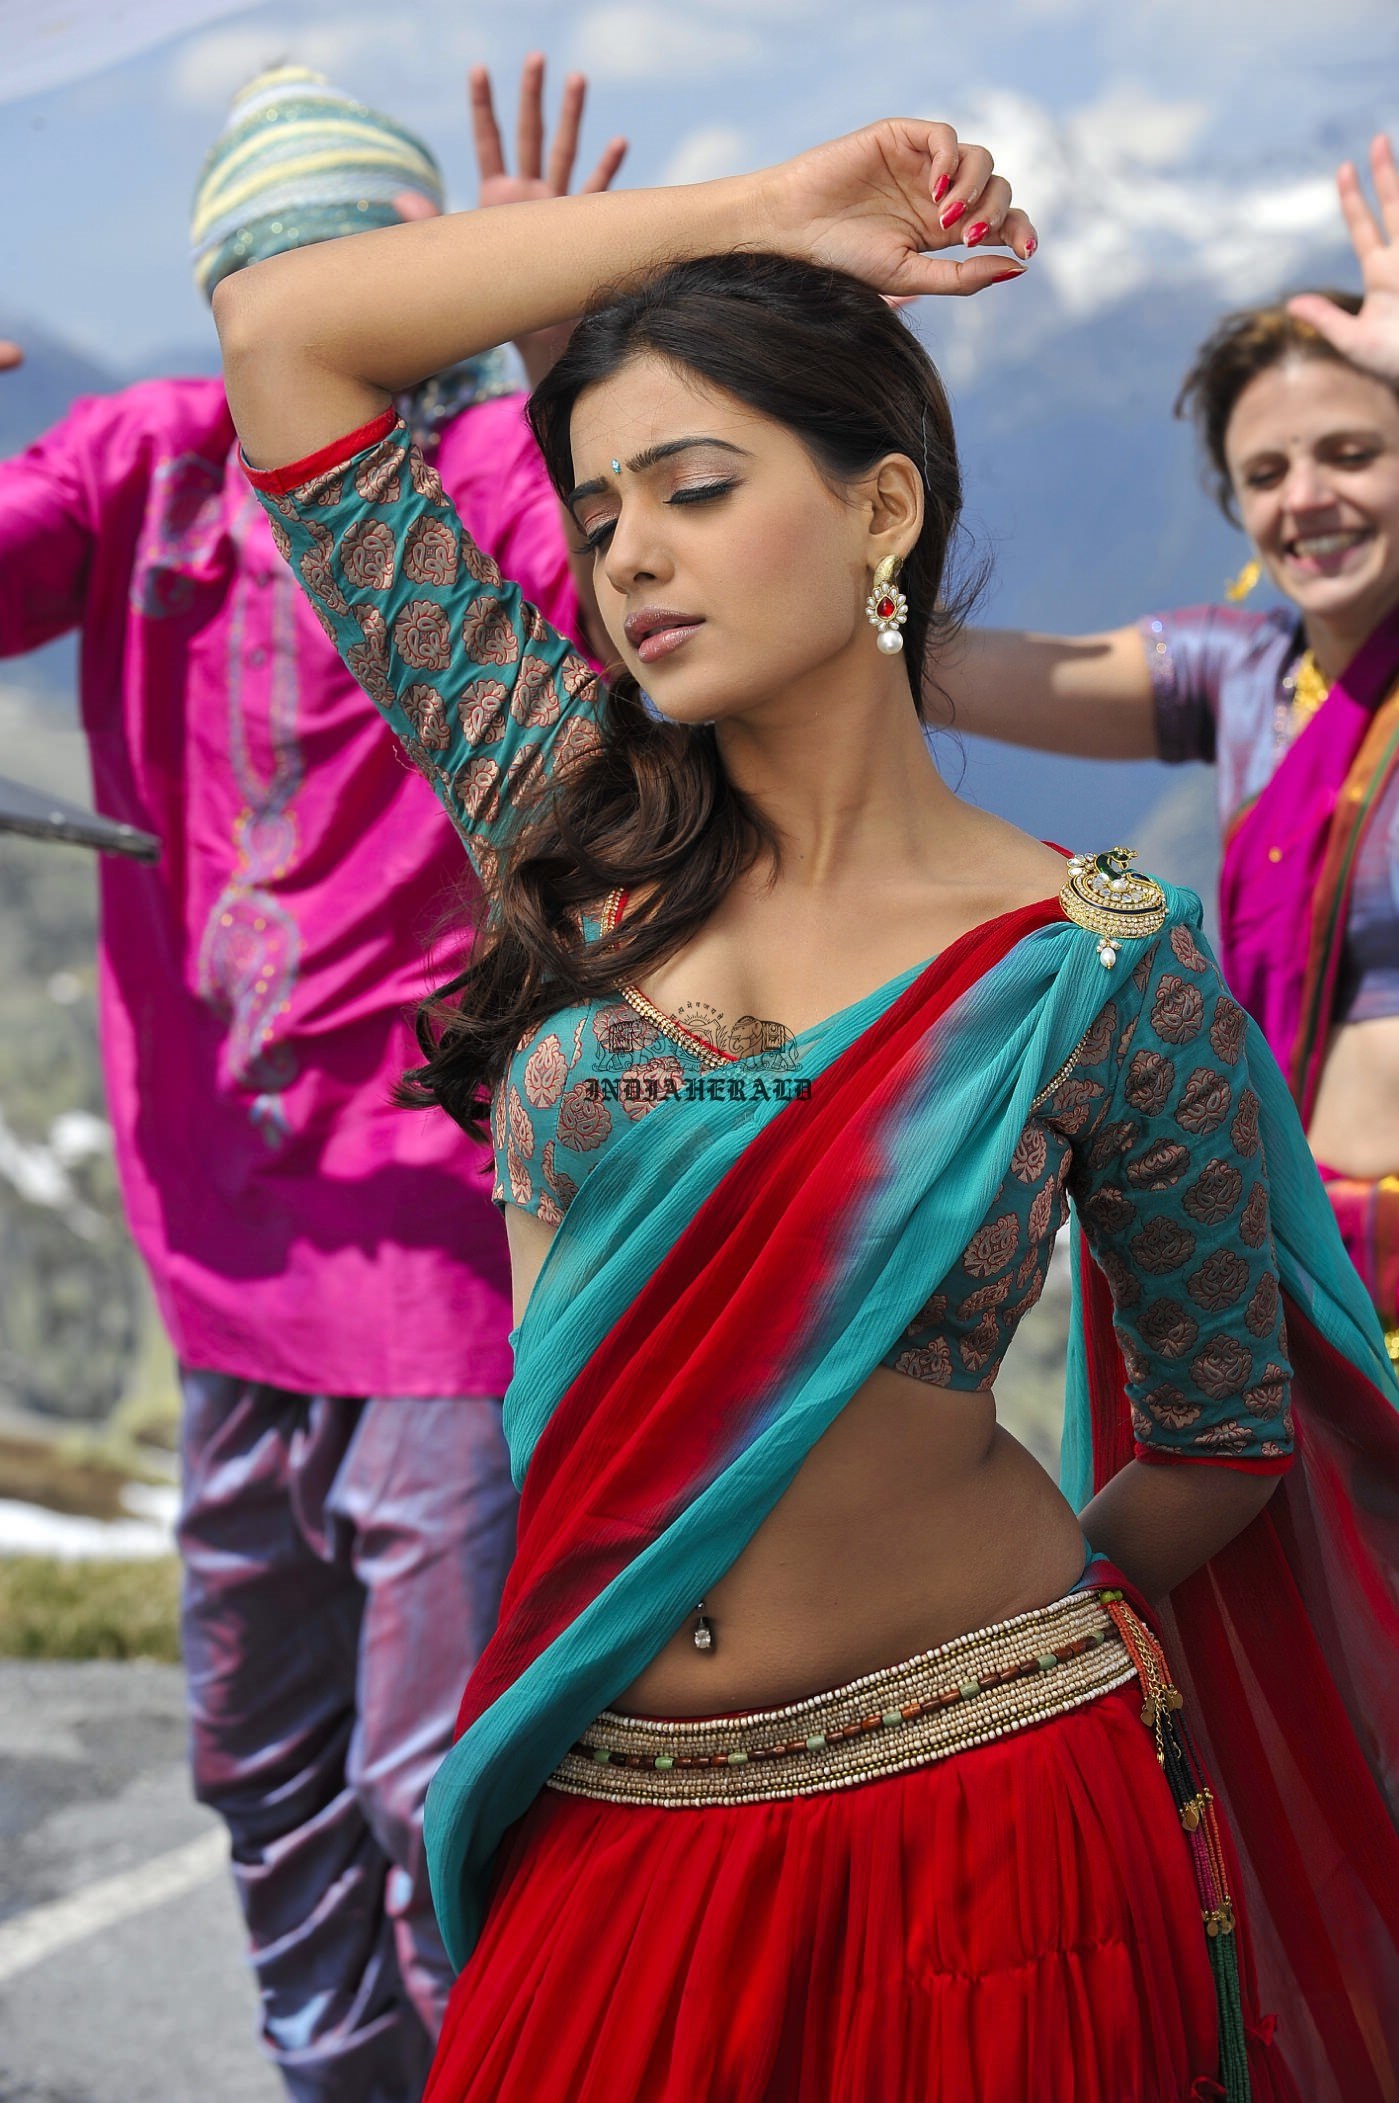 Samantha shows horny expressions on face and exposes her navel and hip curves Set 1